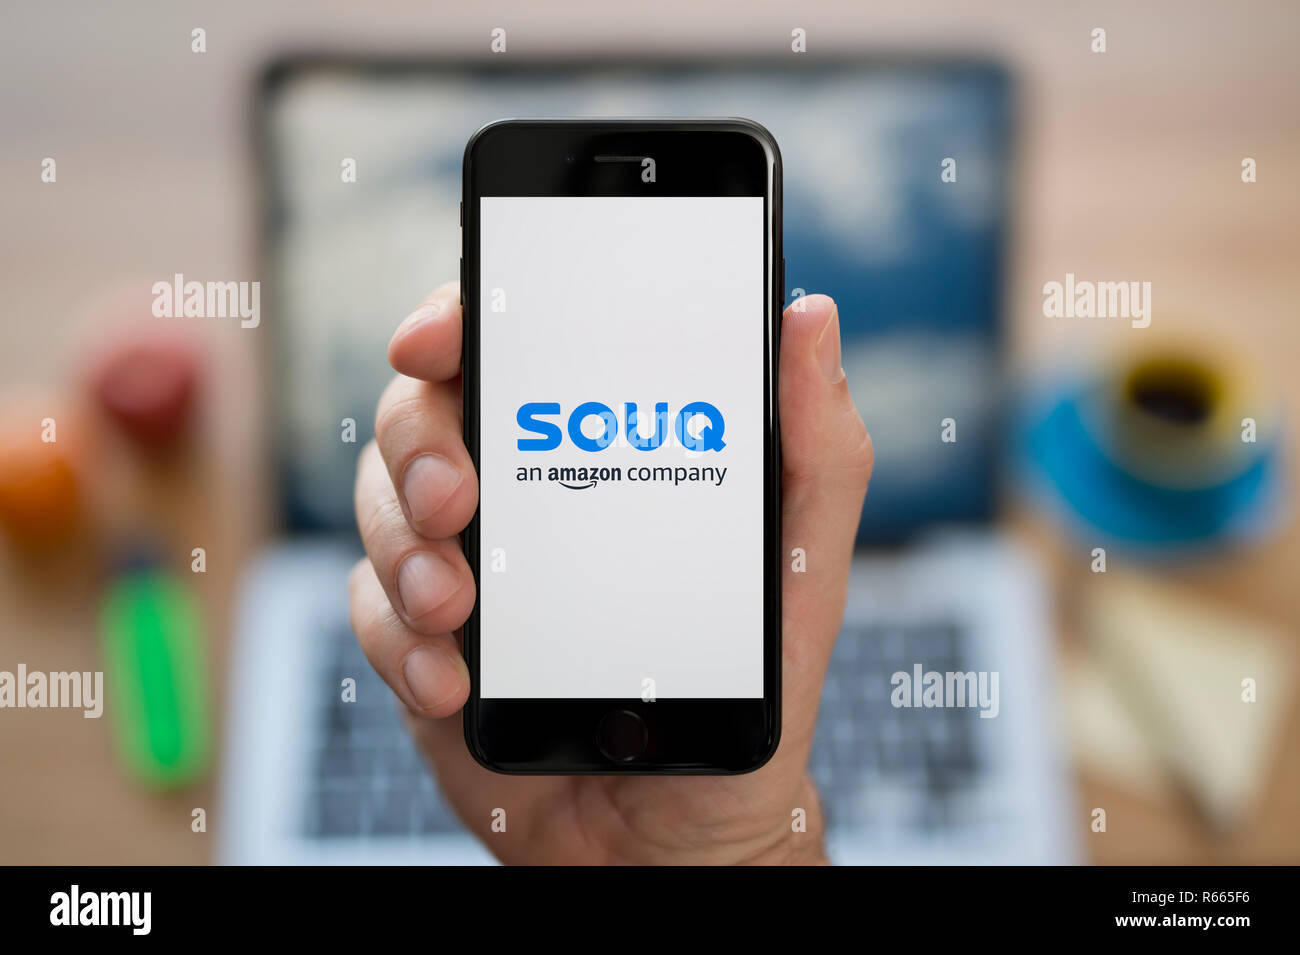 A man looks at his iPhone which displays the Souq logo, while sat at his computer desk (Editorial use only). Stock Photo